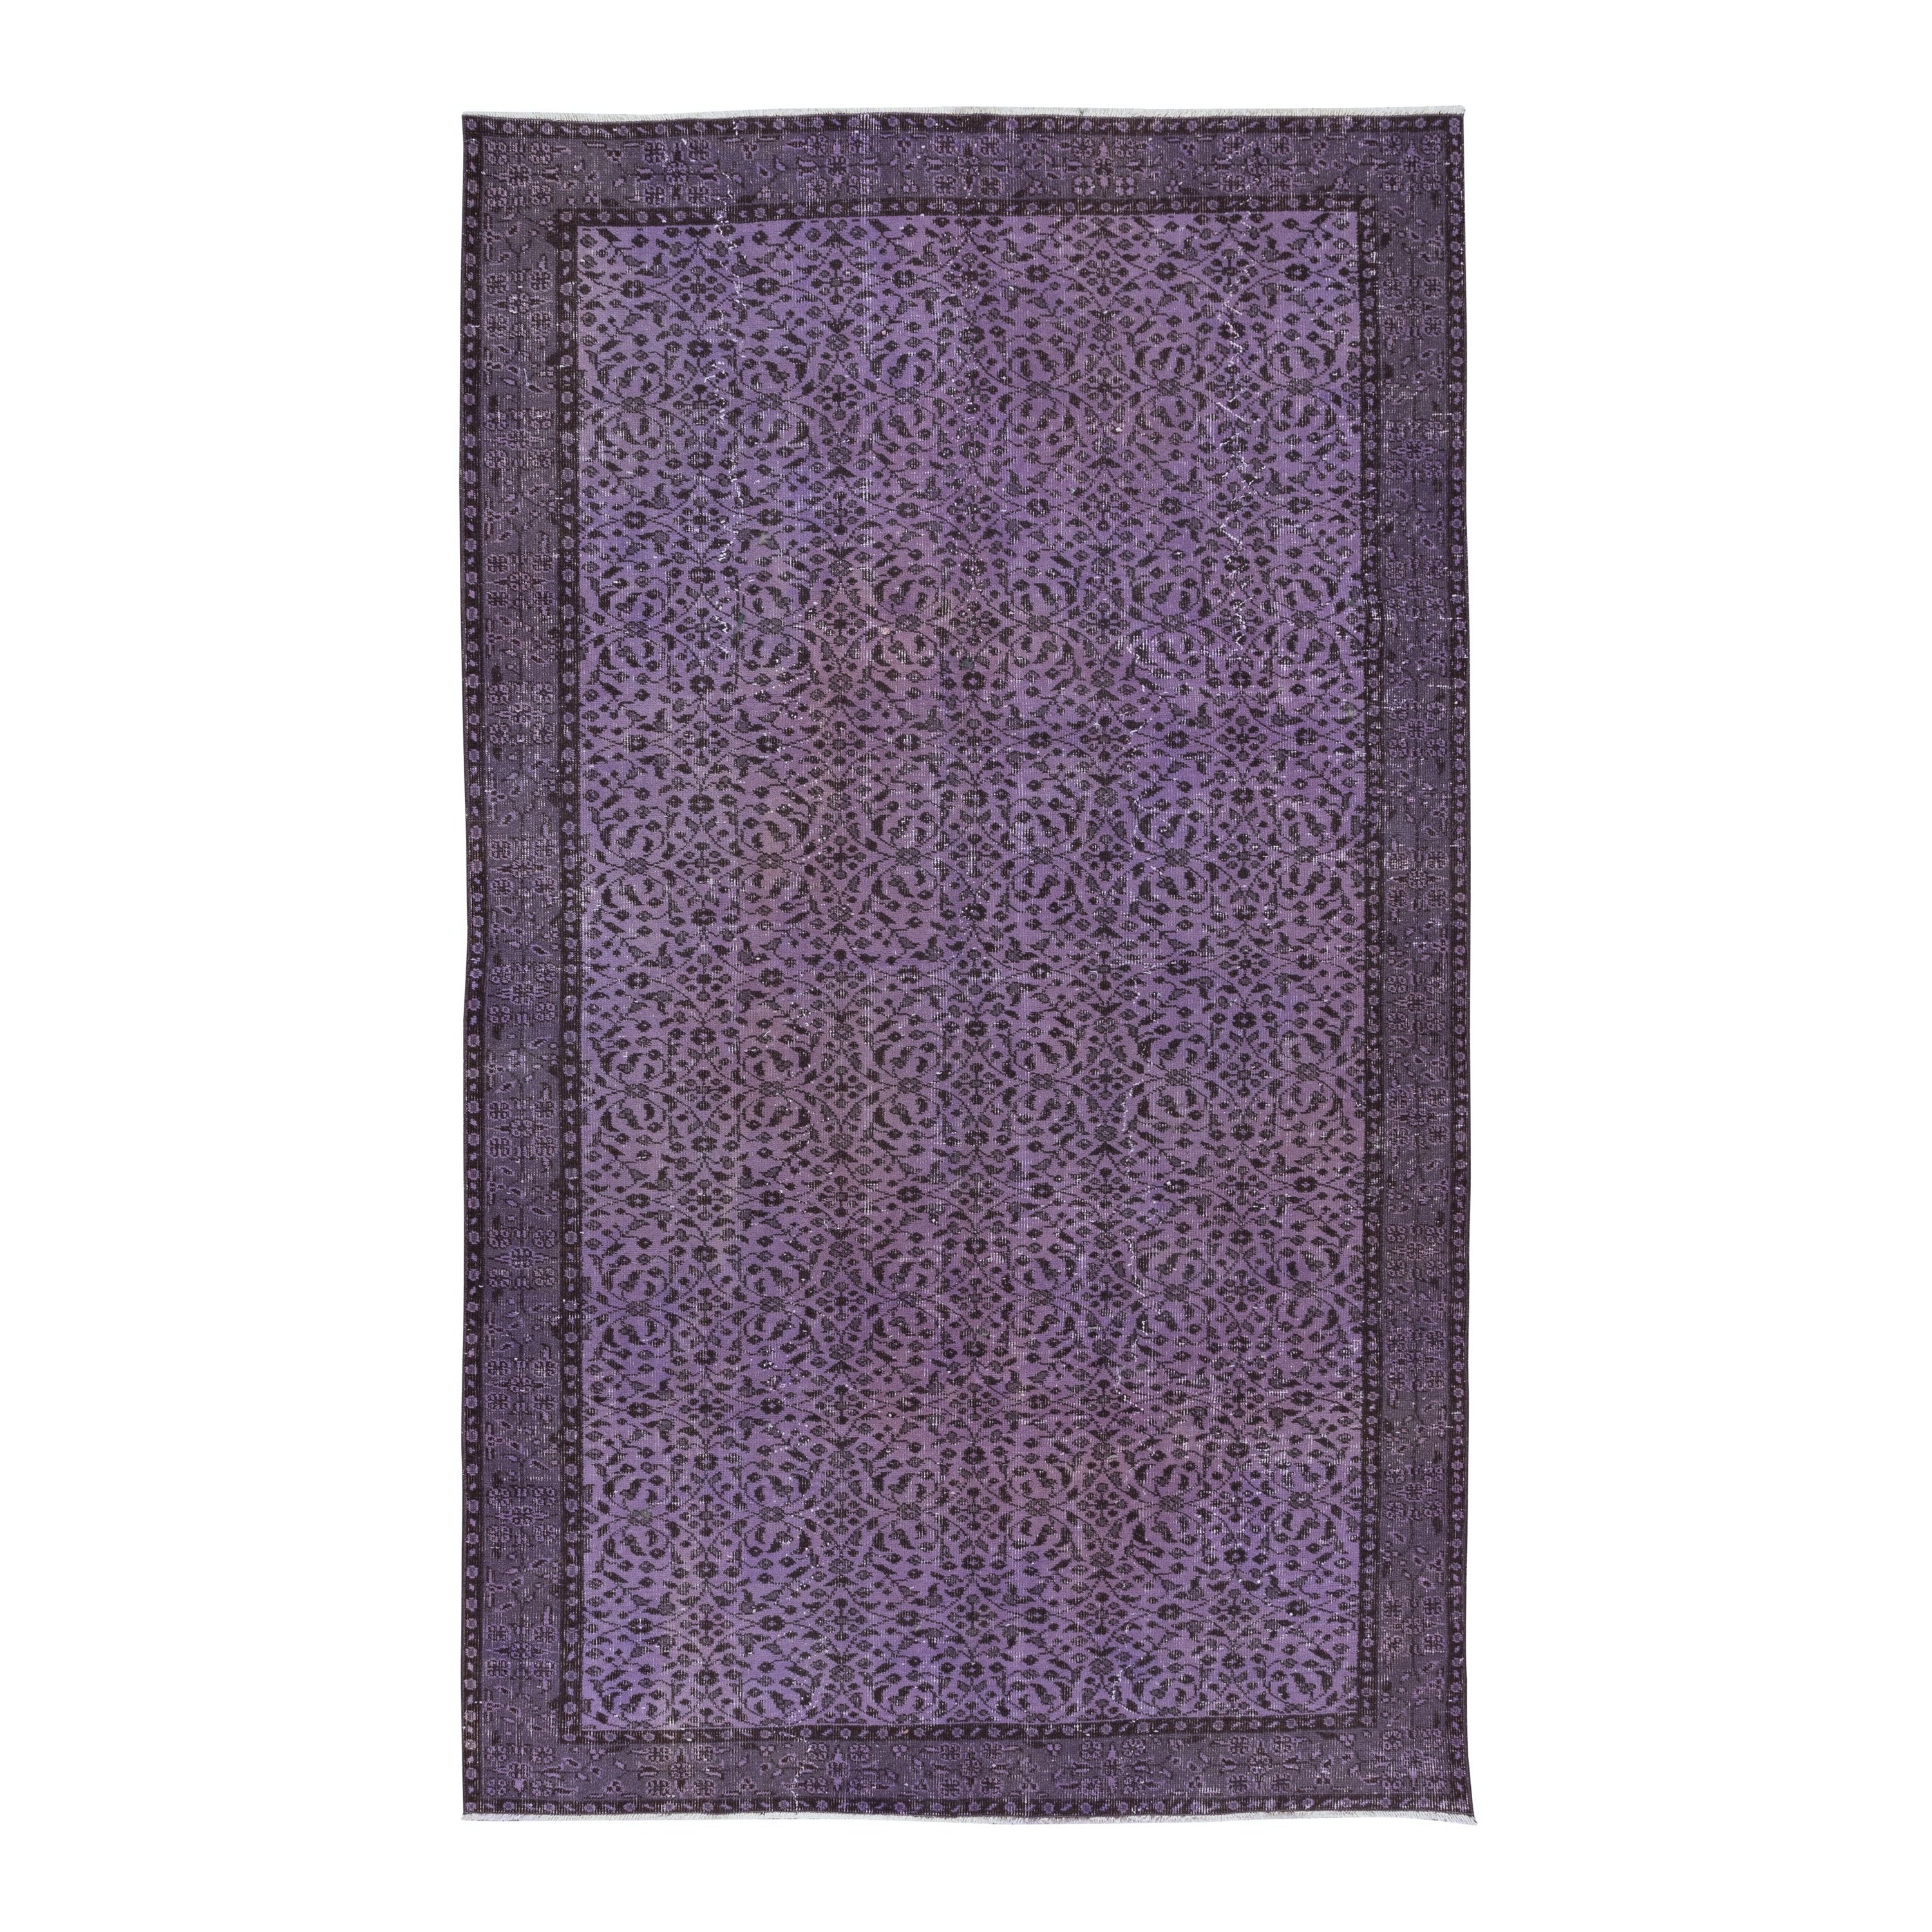 5.6x9 Ft Modern Handmade Turkish Rug with Flower Design and Purple Background For Sale